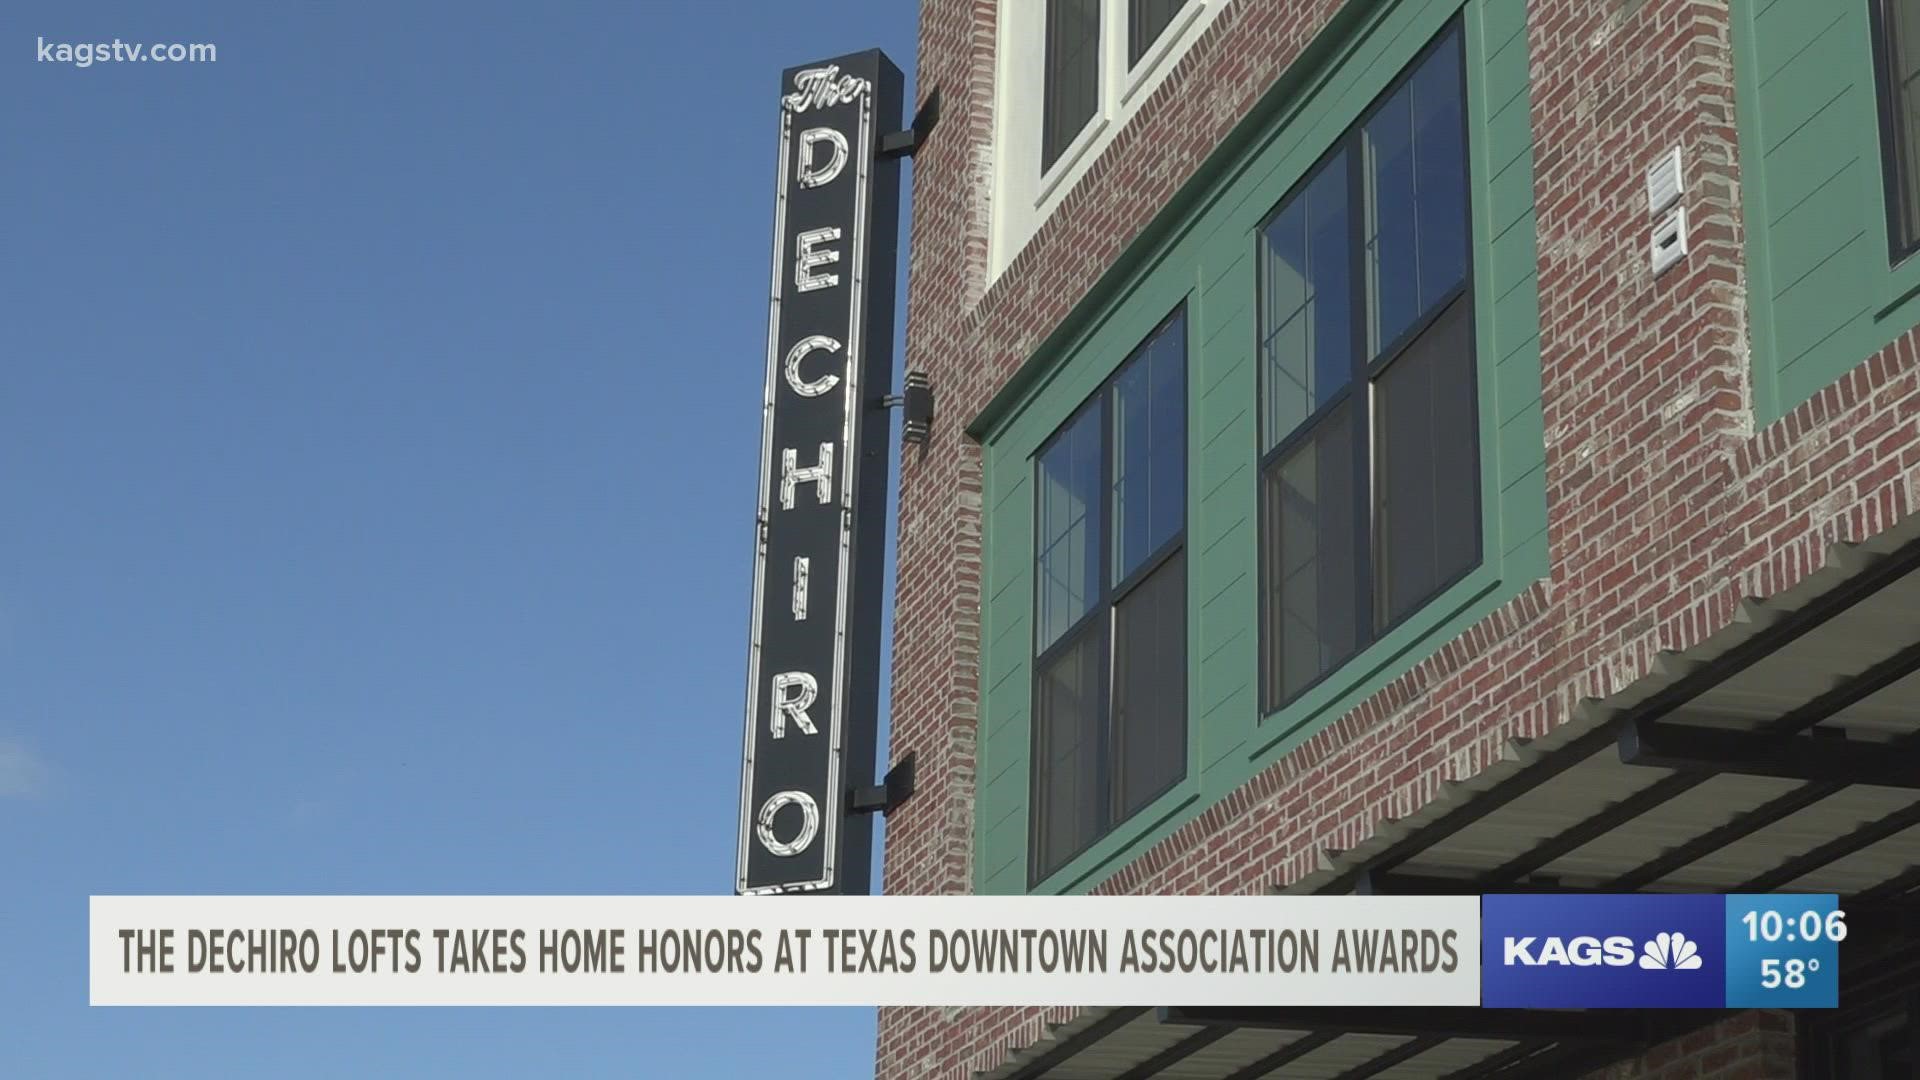 The Dechiro Lofts in Downtown Bryan won the "Best New Construction Site in a Population over 50,000" Award last week